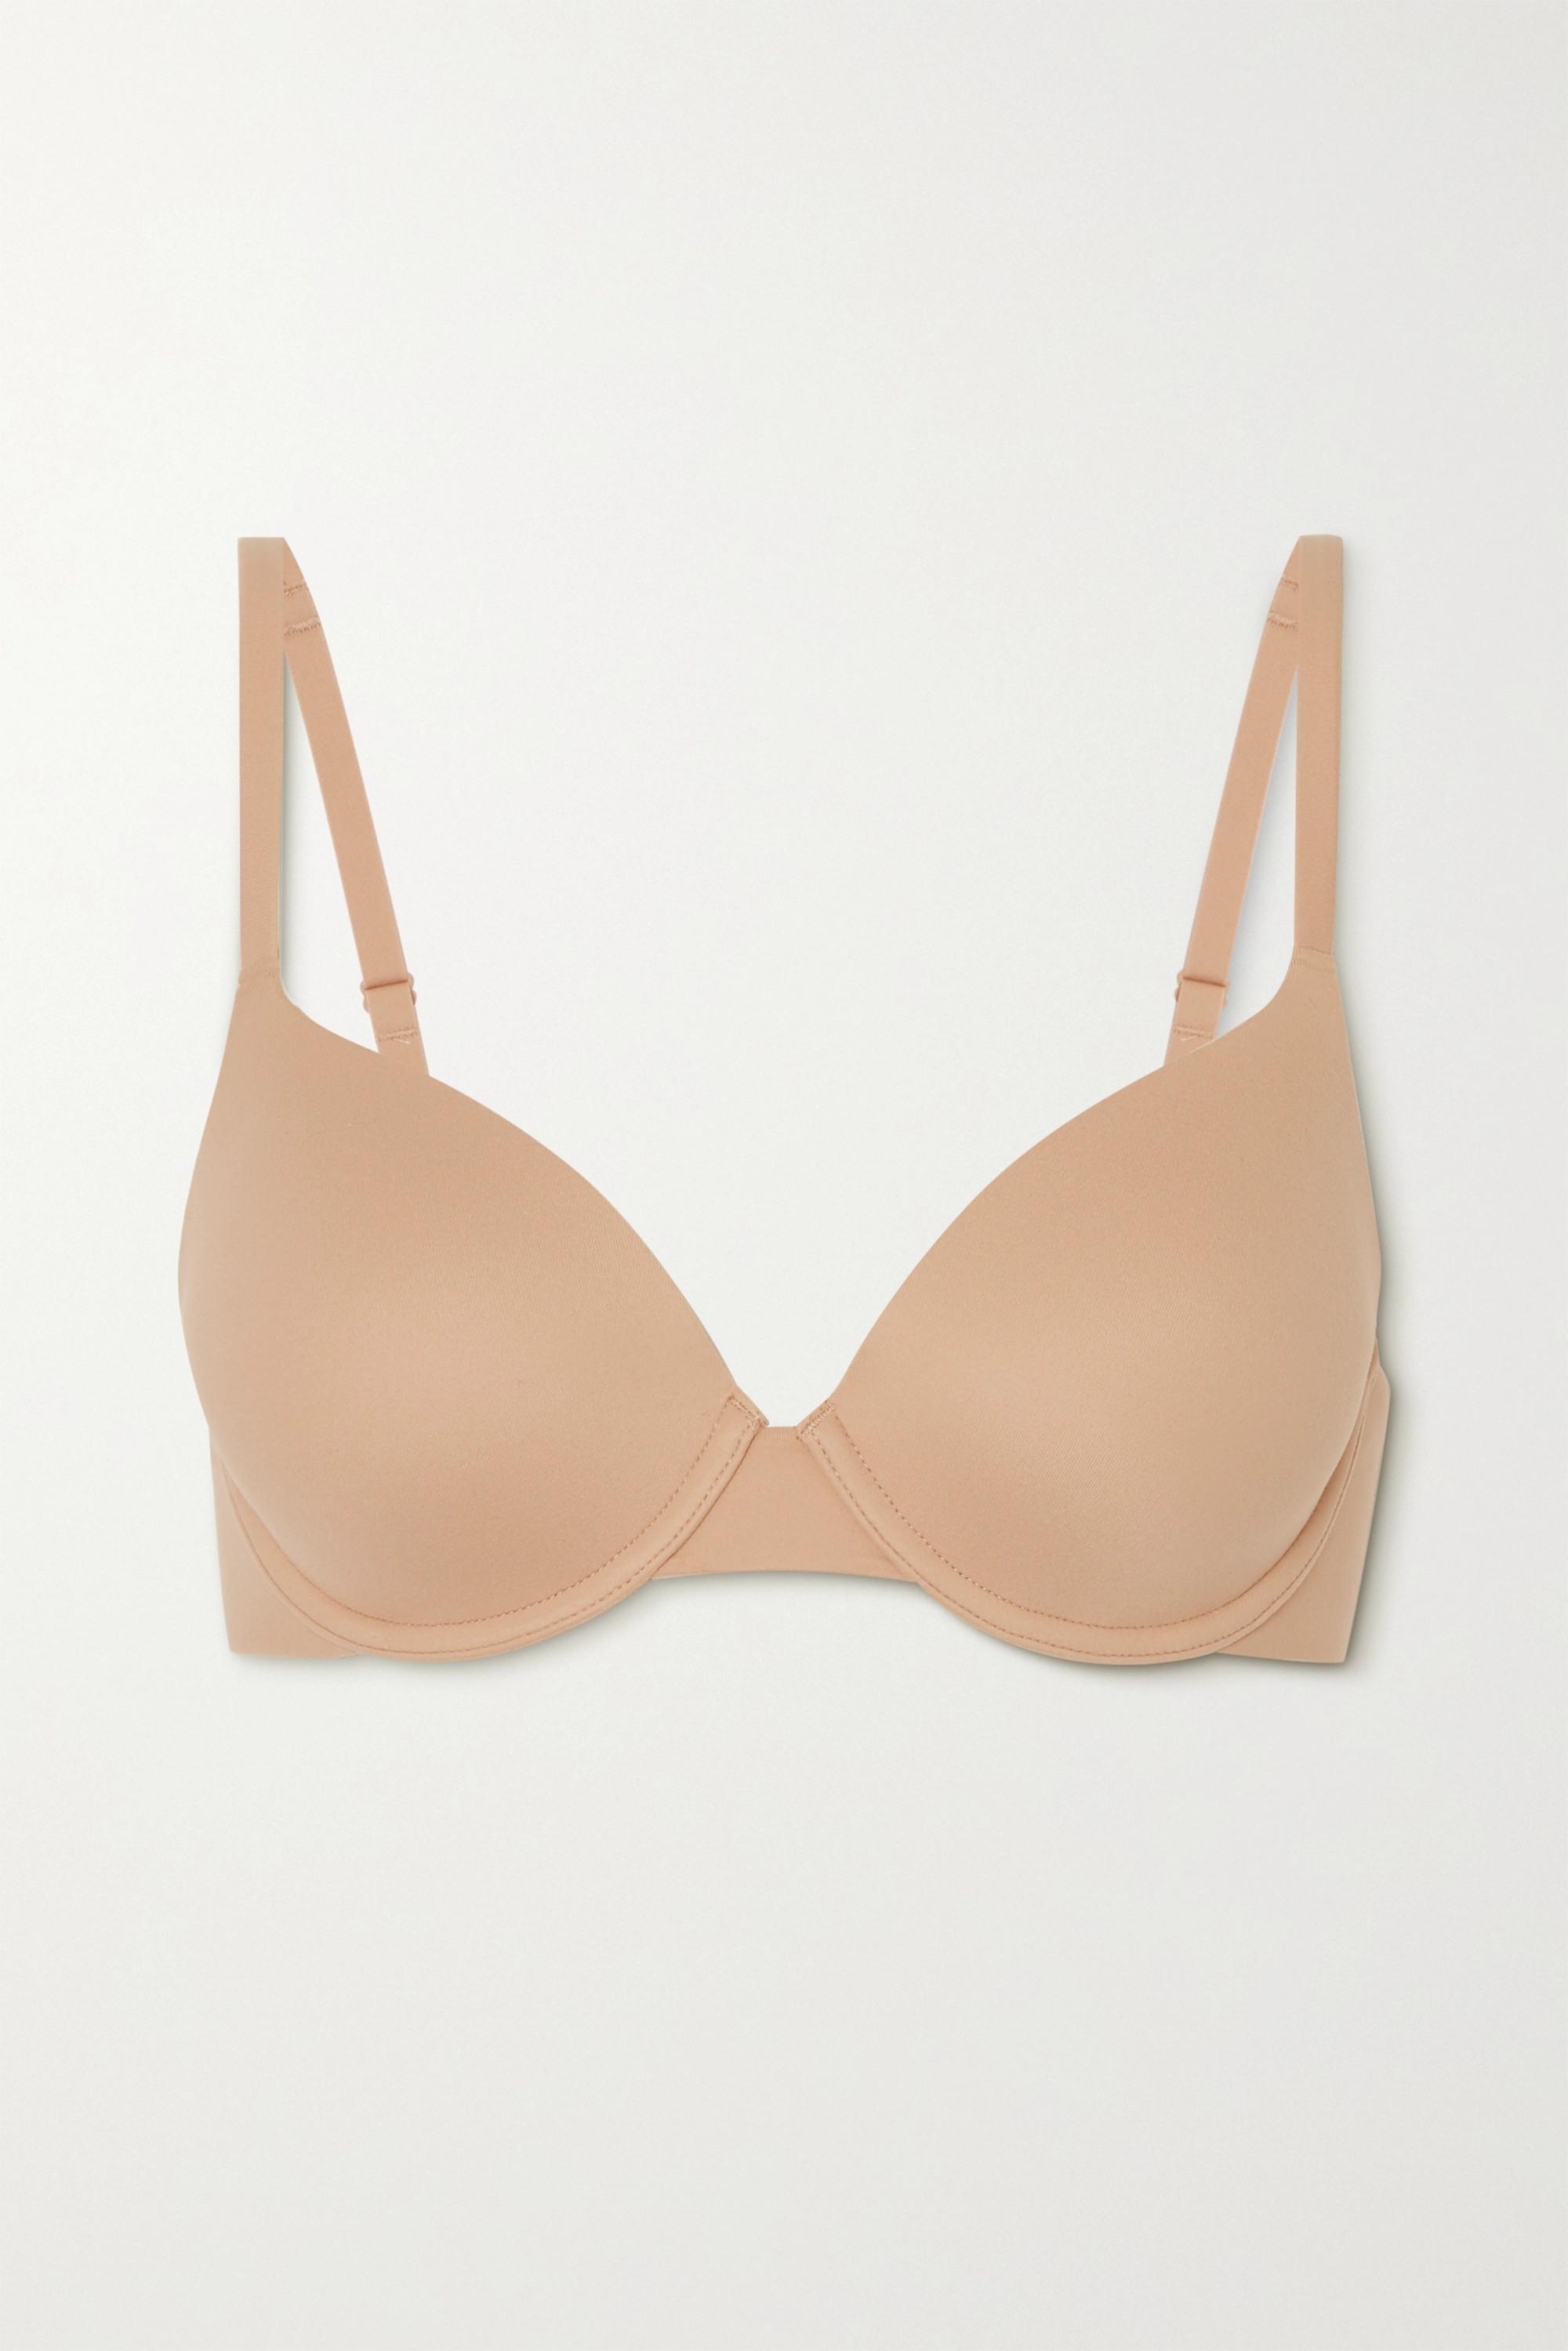 Skims Fits Everybody T-shirt Bra in Natural